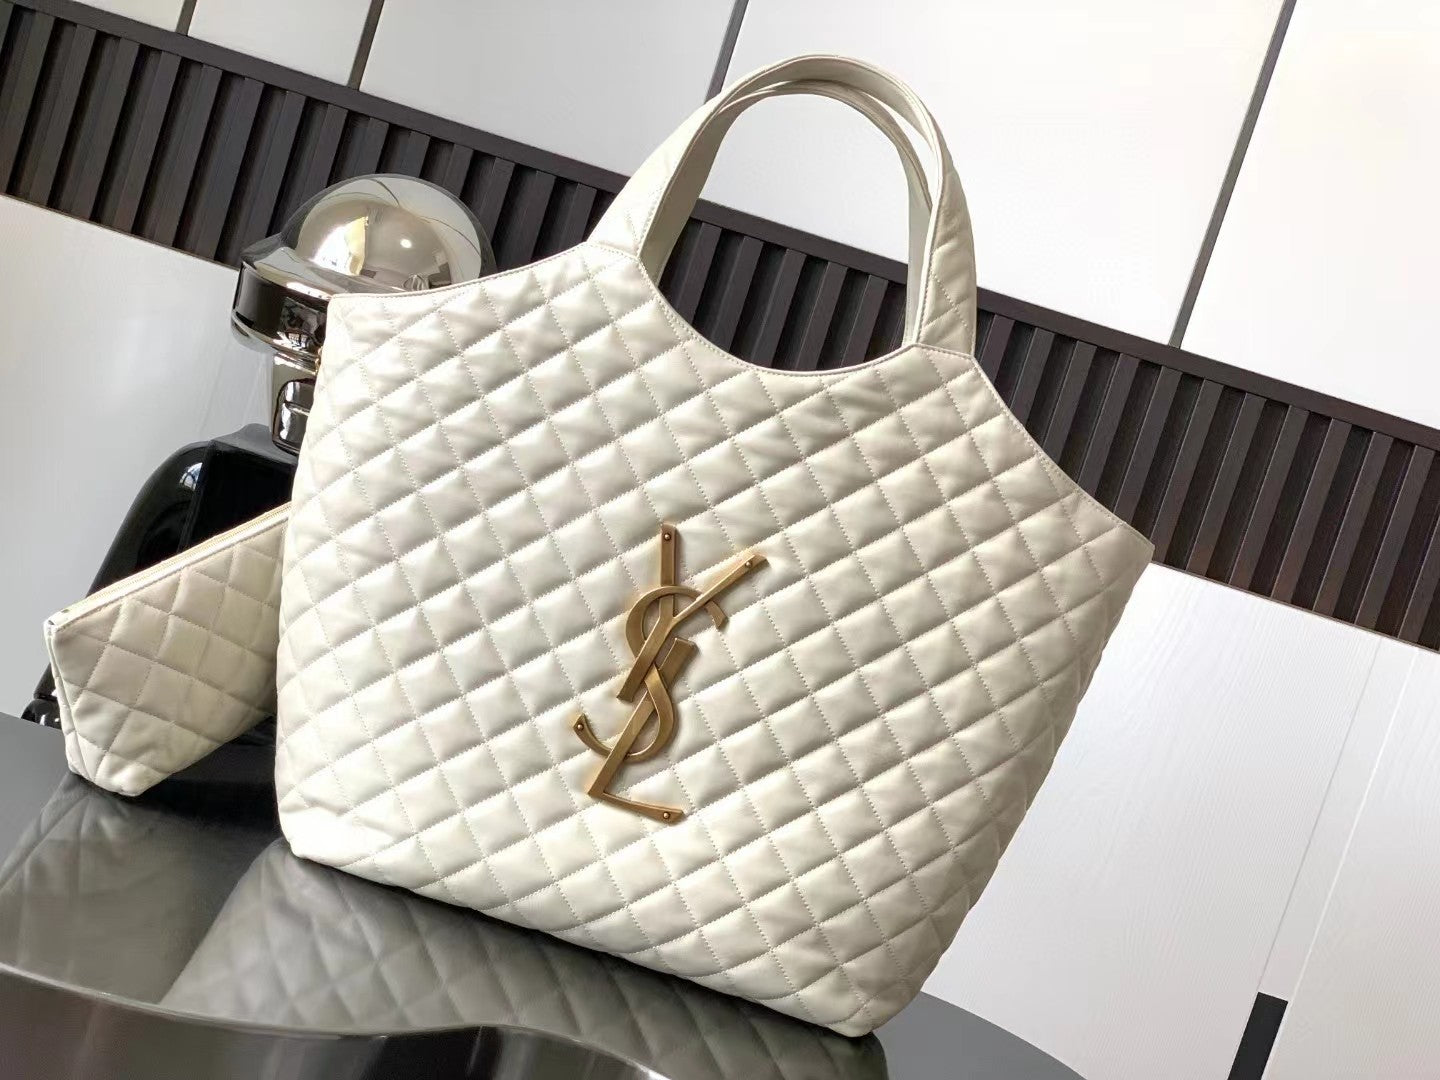 YSL ICARE MAXI SHOPPING BAG IN QUILTED LAMBSKIN – White 698651 - Xpurse